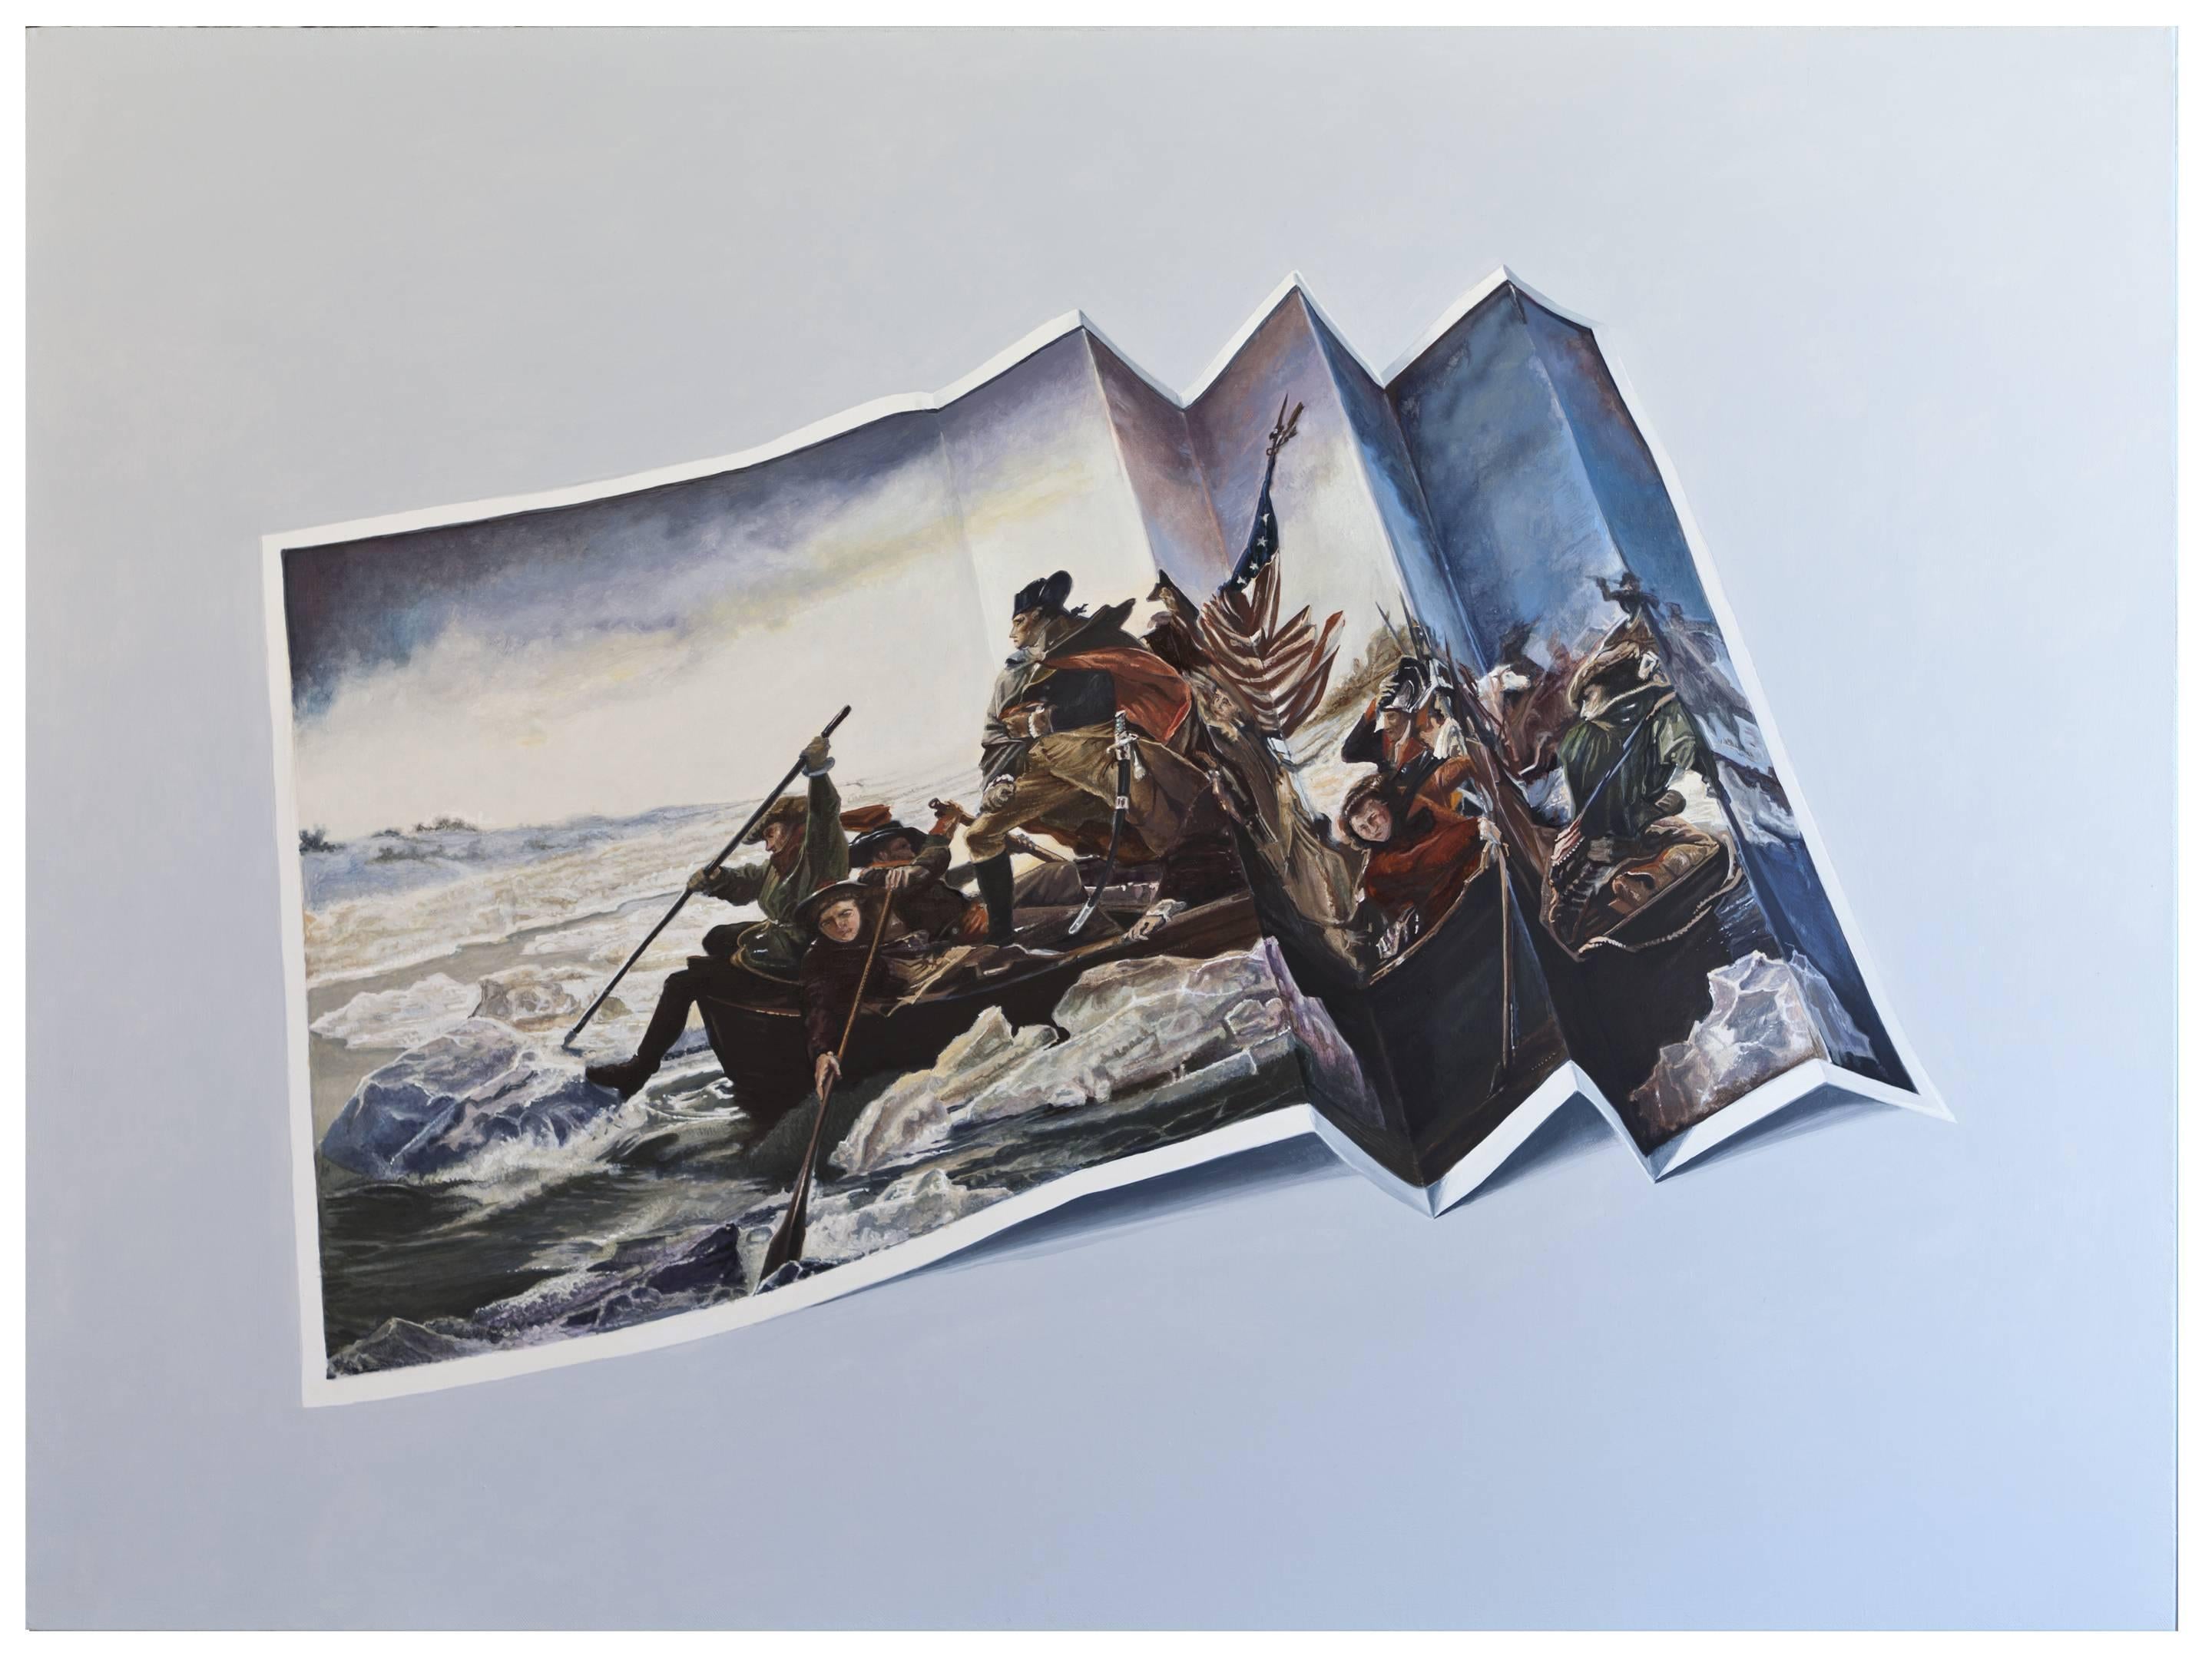 Washington Crossing the Delaware - Painting by Geandy Pavon